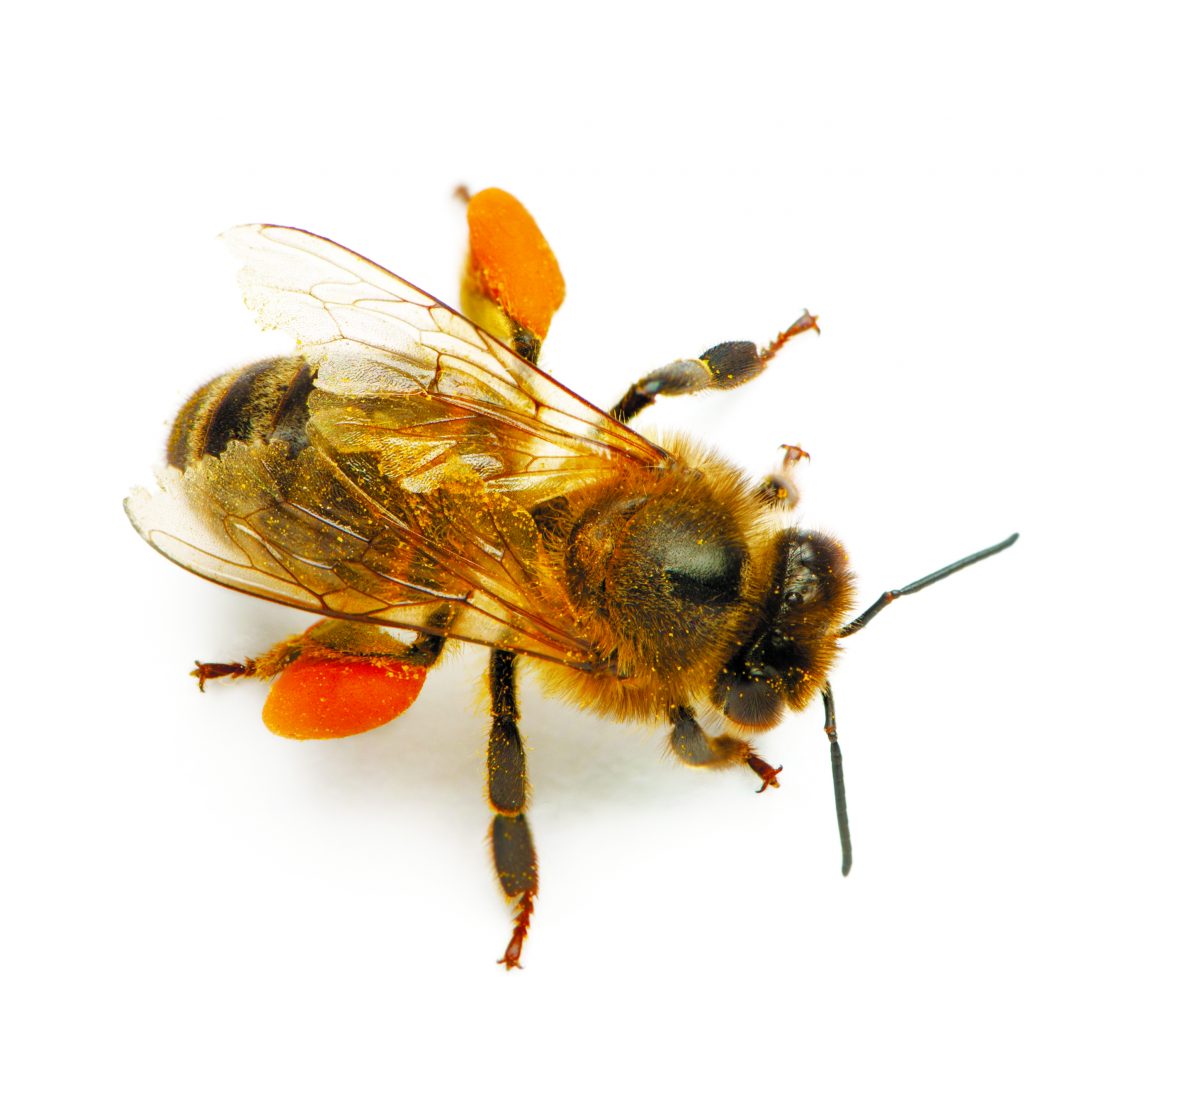 Bee pollen contains 22 amino acid, 27 minerals, and the full gamut of vitamins, hormones, and fatty acids. (Photos.com)